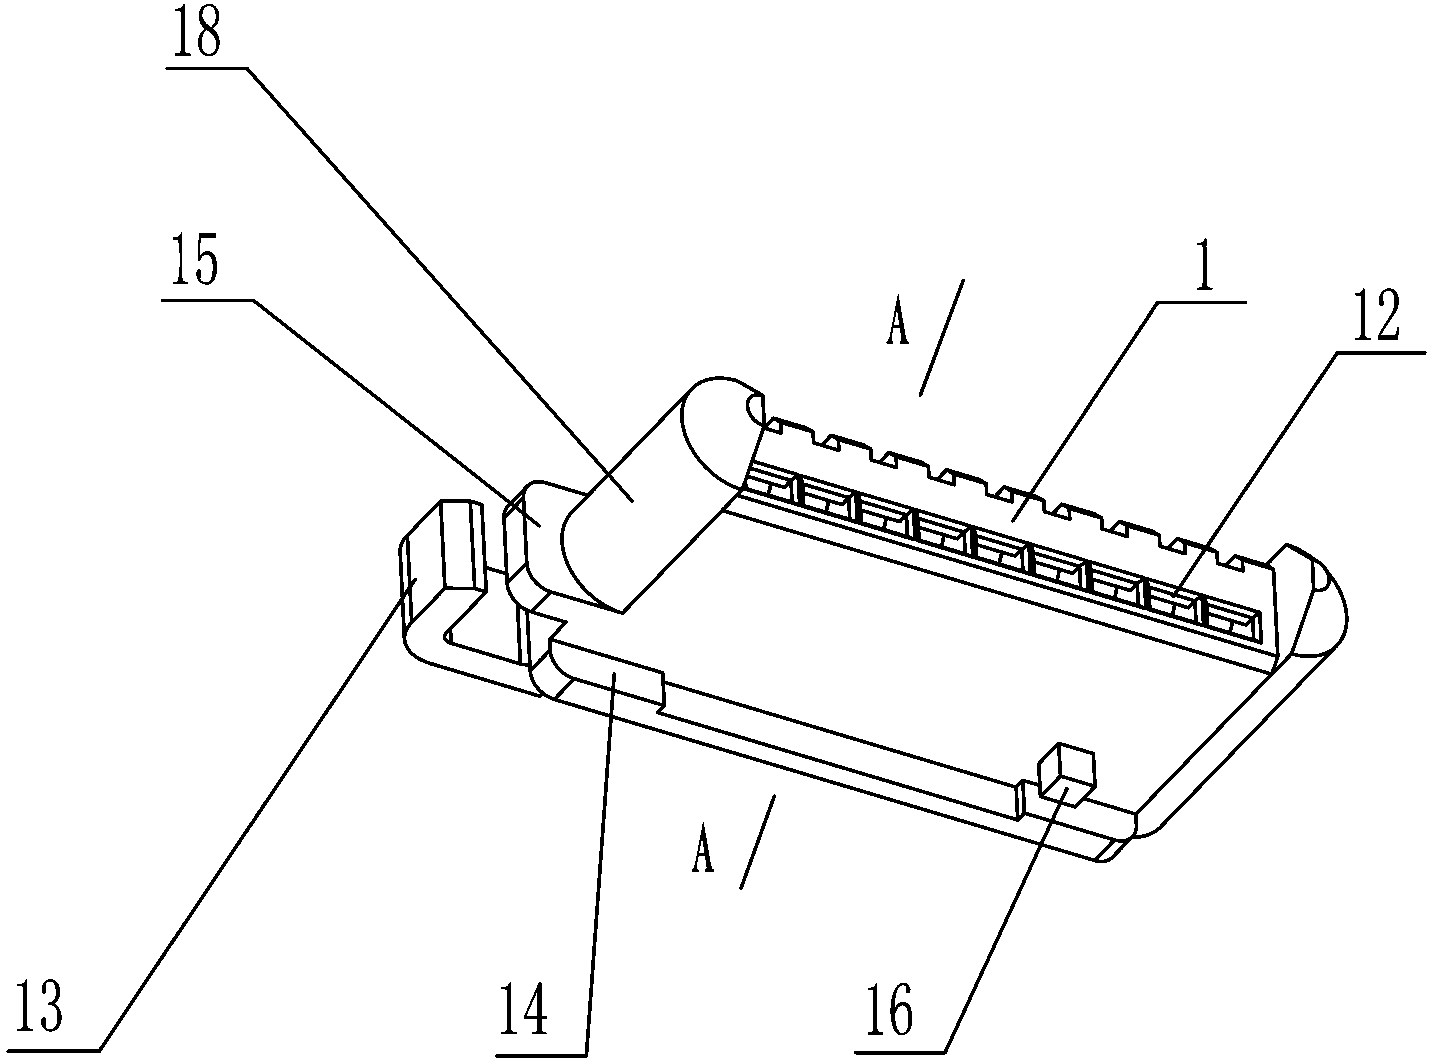 Floating connector